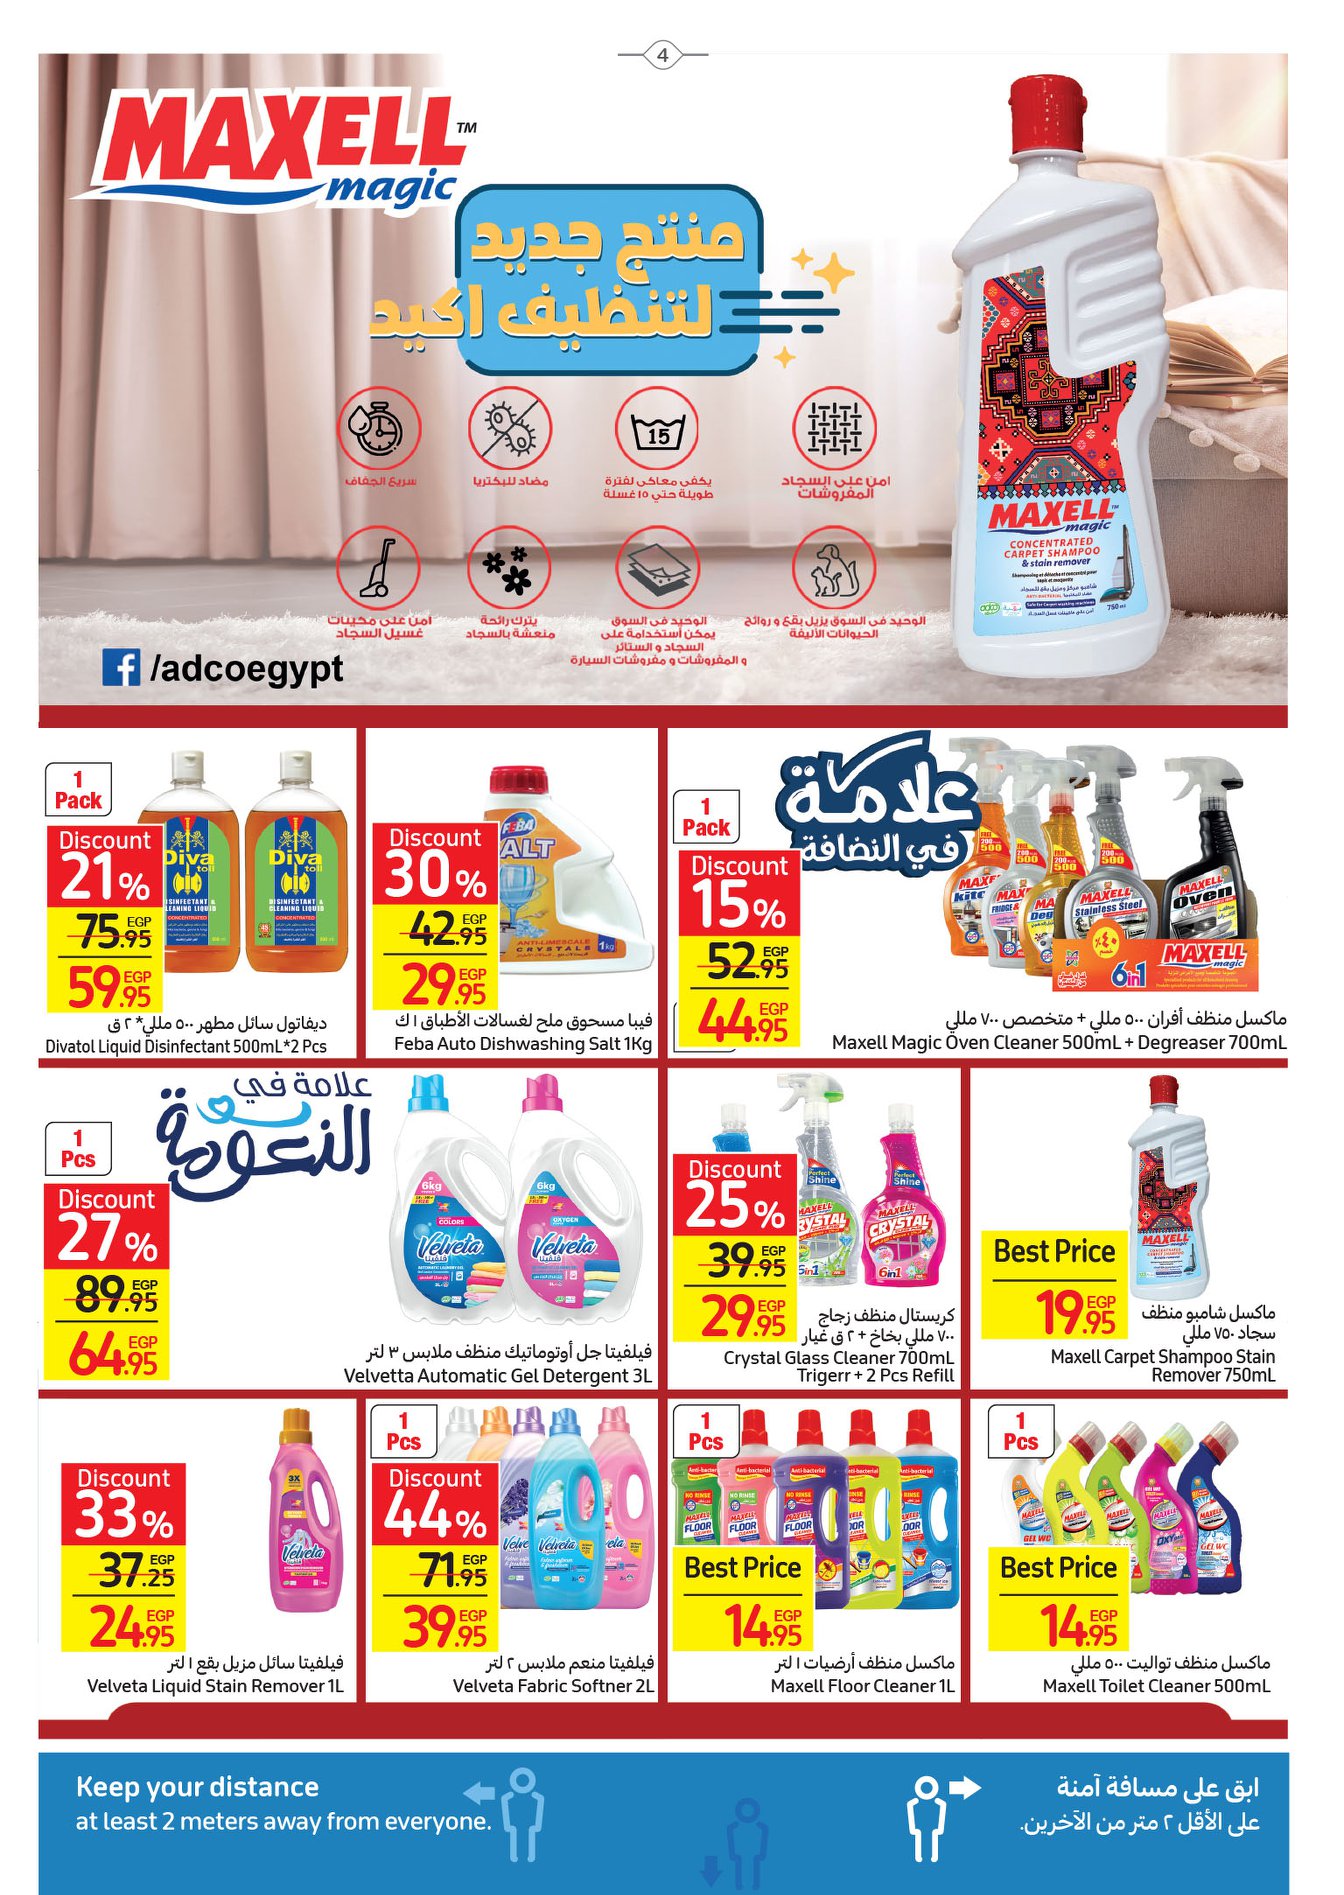 Enjoy now the strongest Carrefour offers from April 17-25, 2022.. Huge discounts on home essentials 21